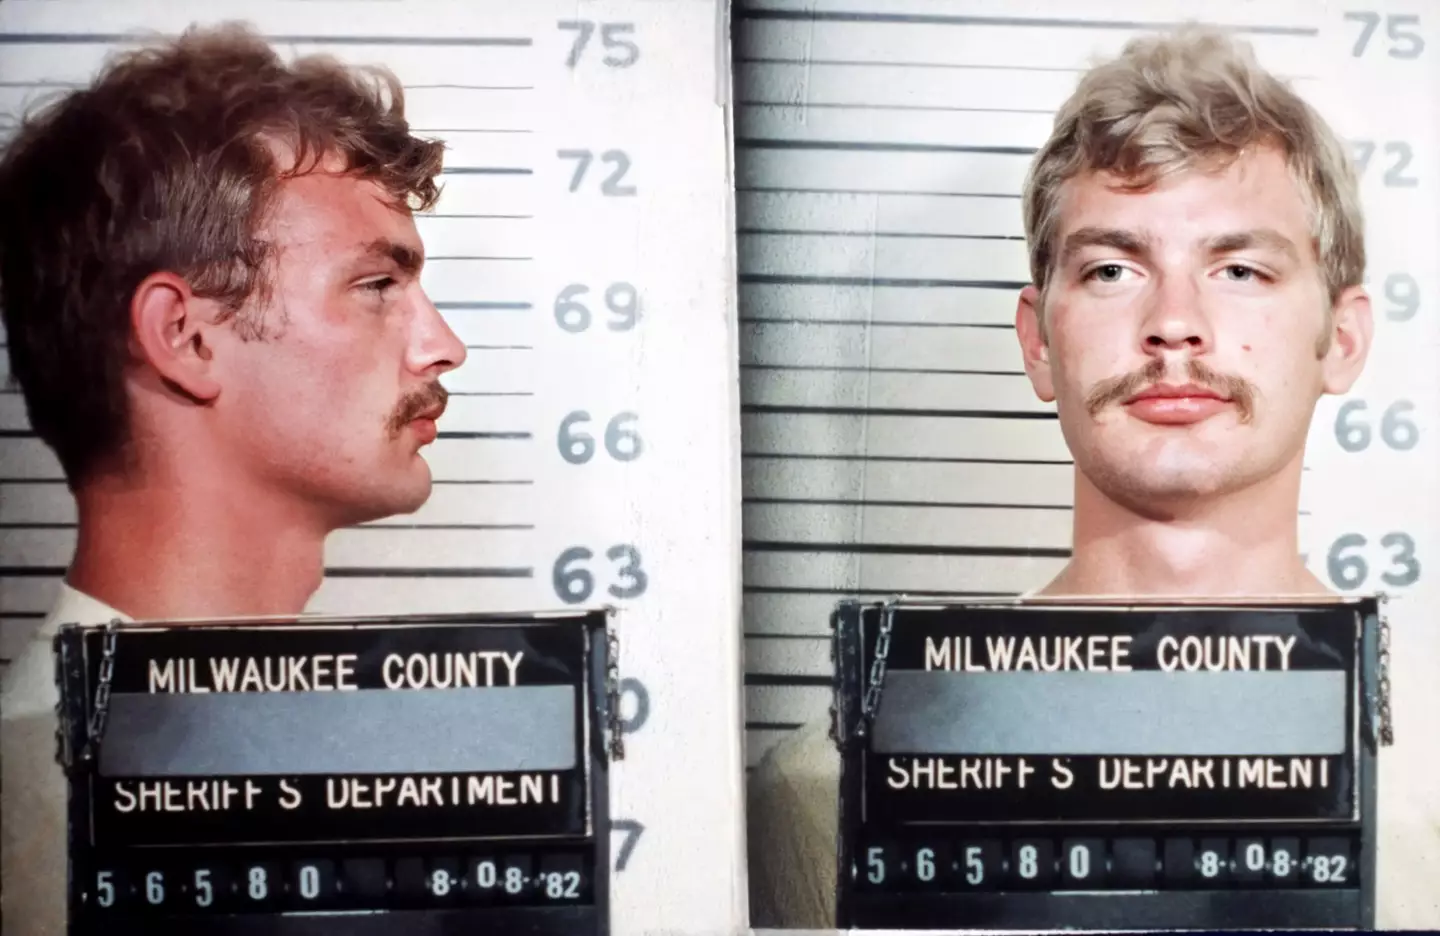 Dahmer was finally caught in 1991.